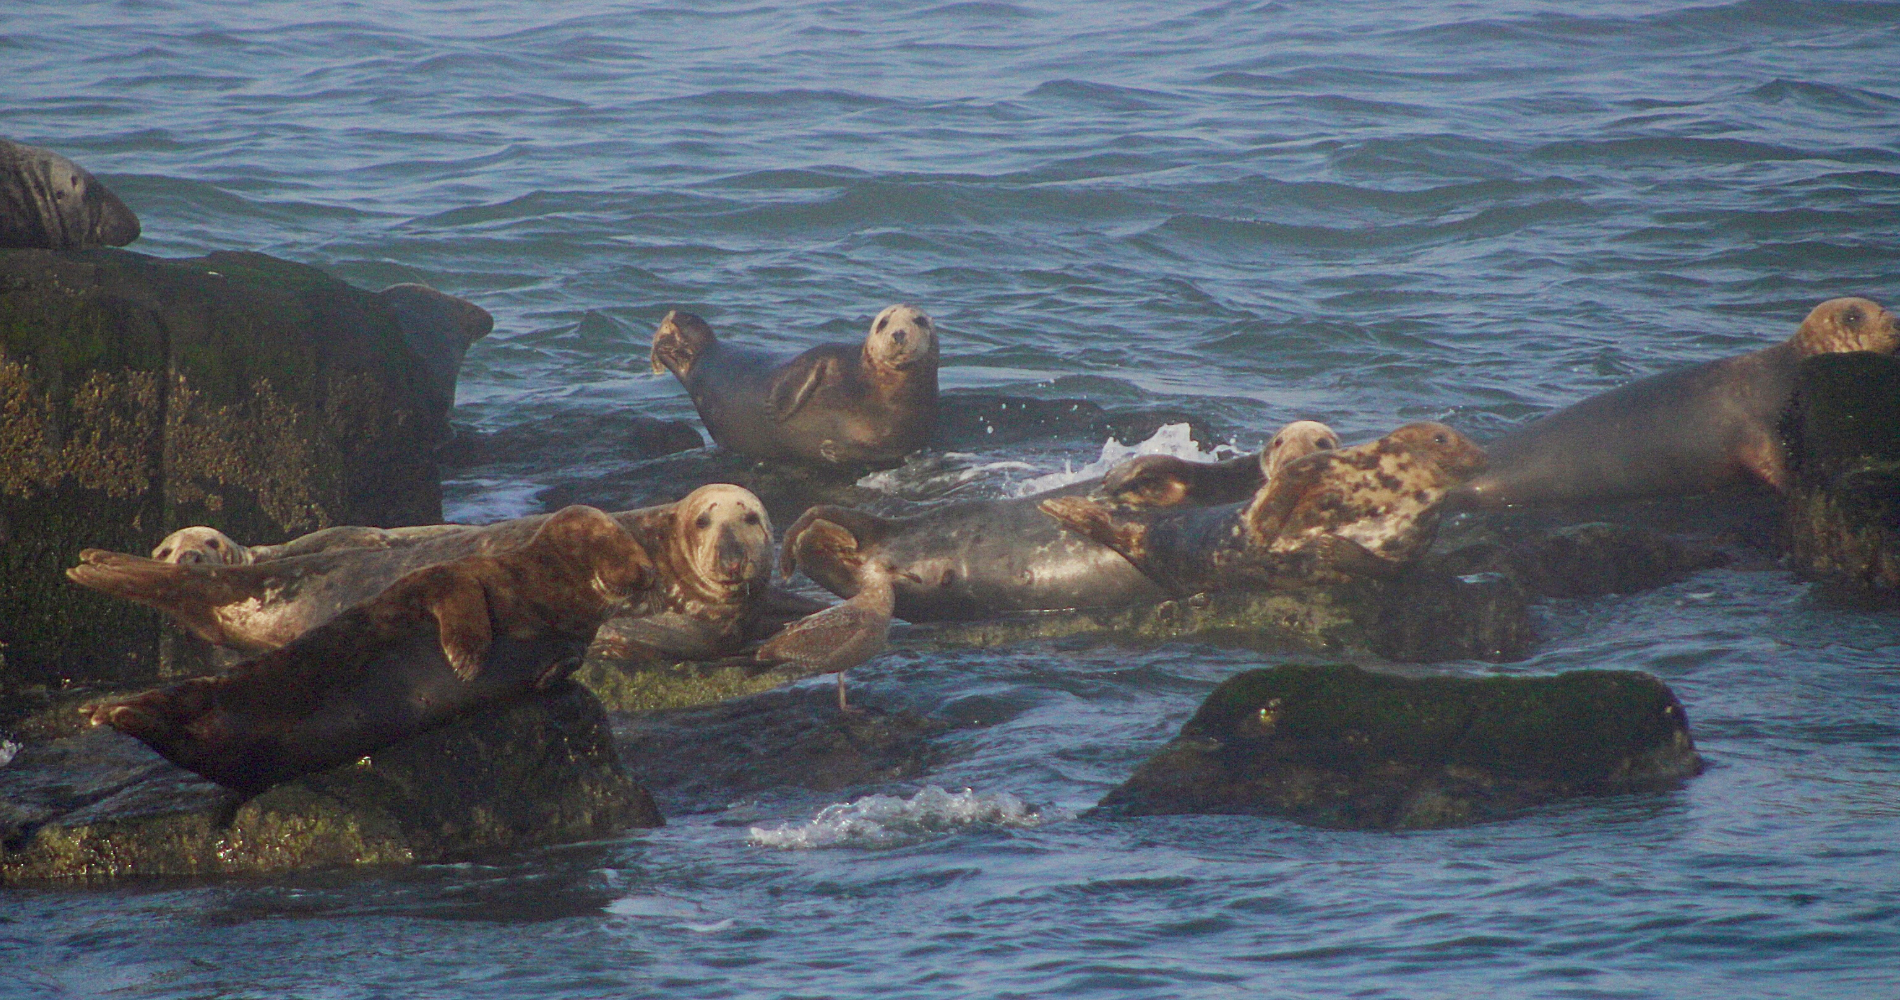 a handful of harbor and grey seals sitting on top of rocks in the ocean